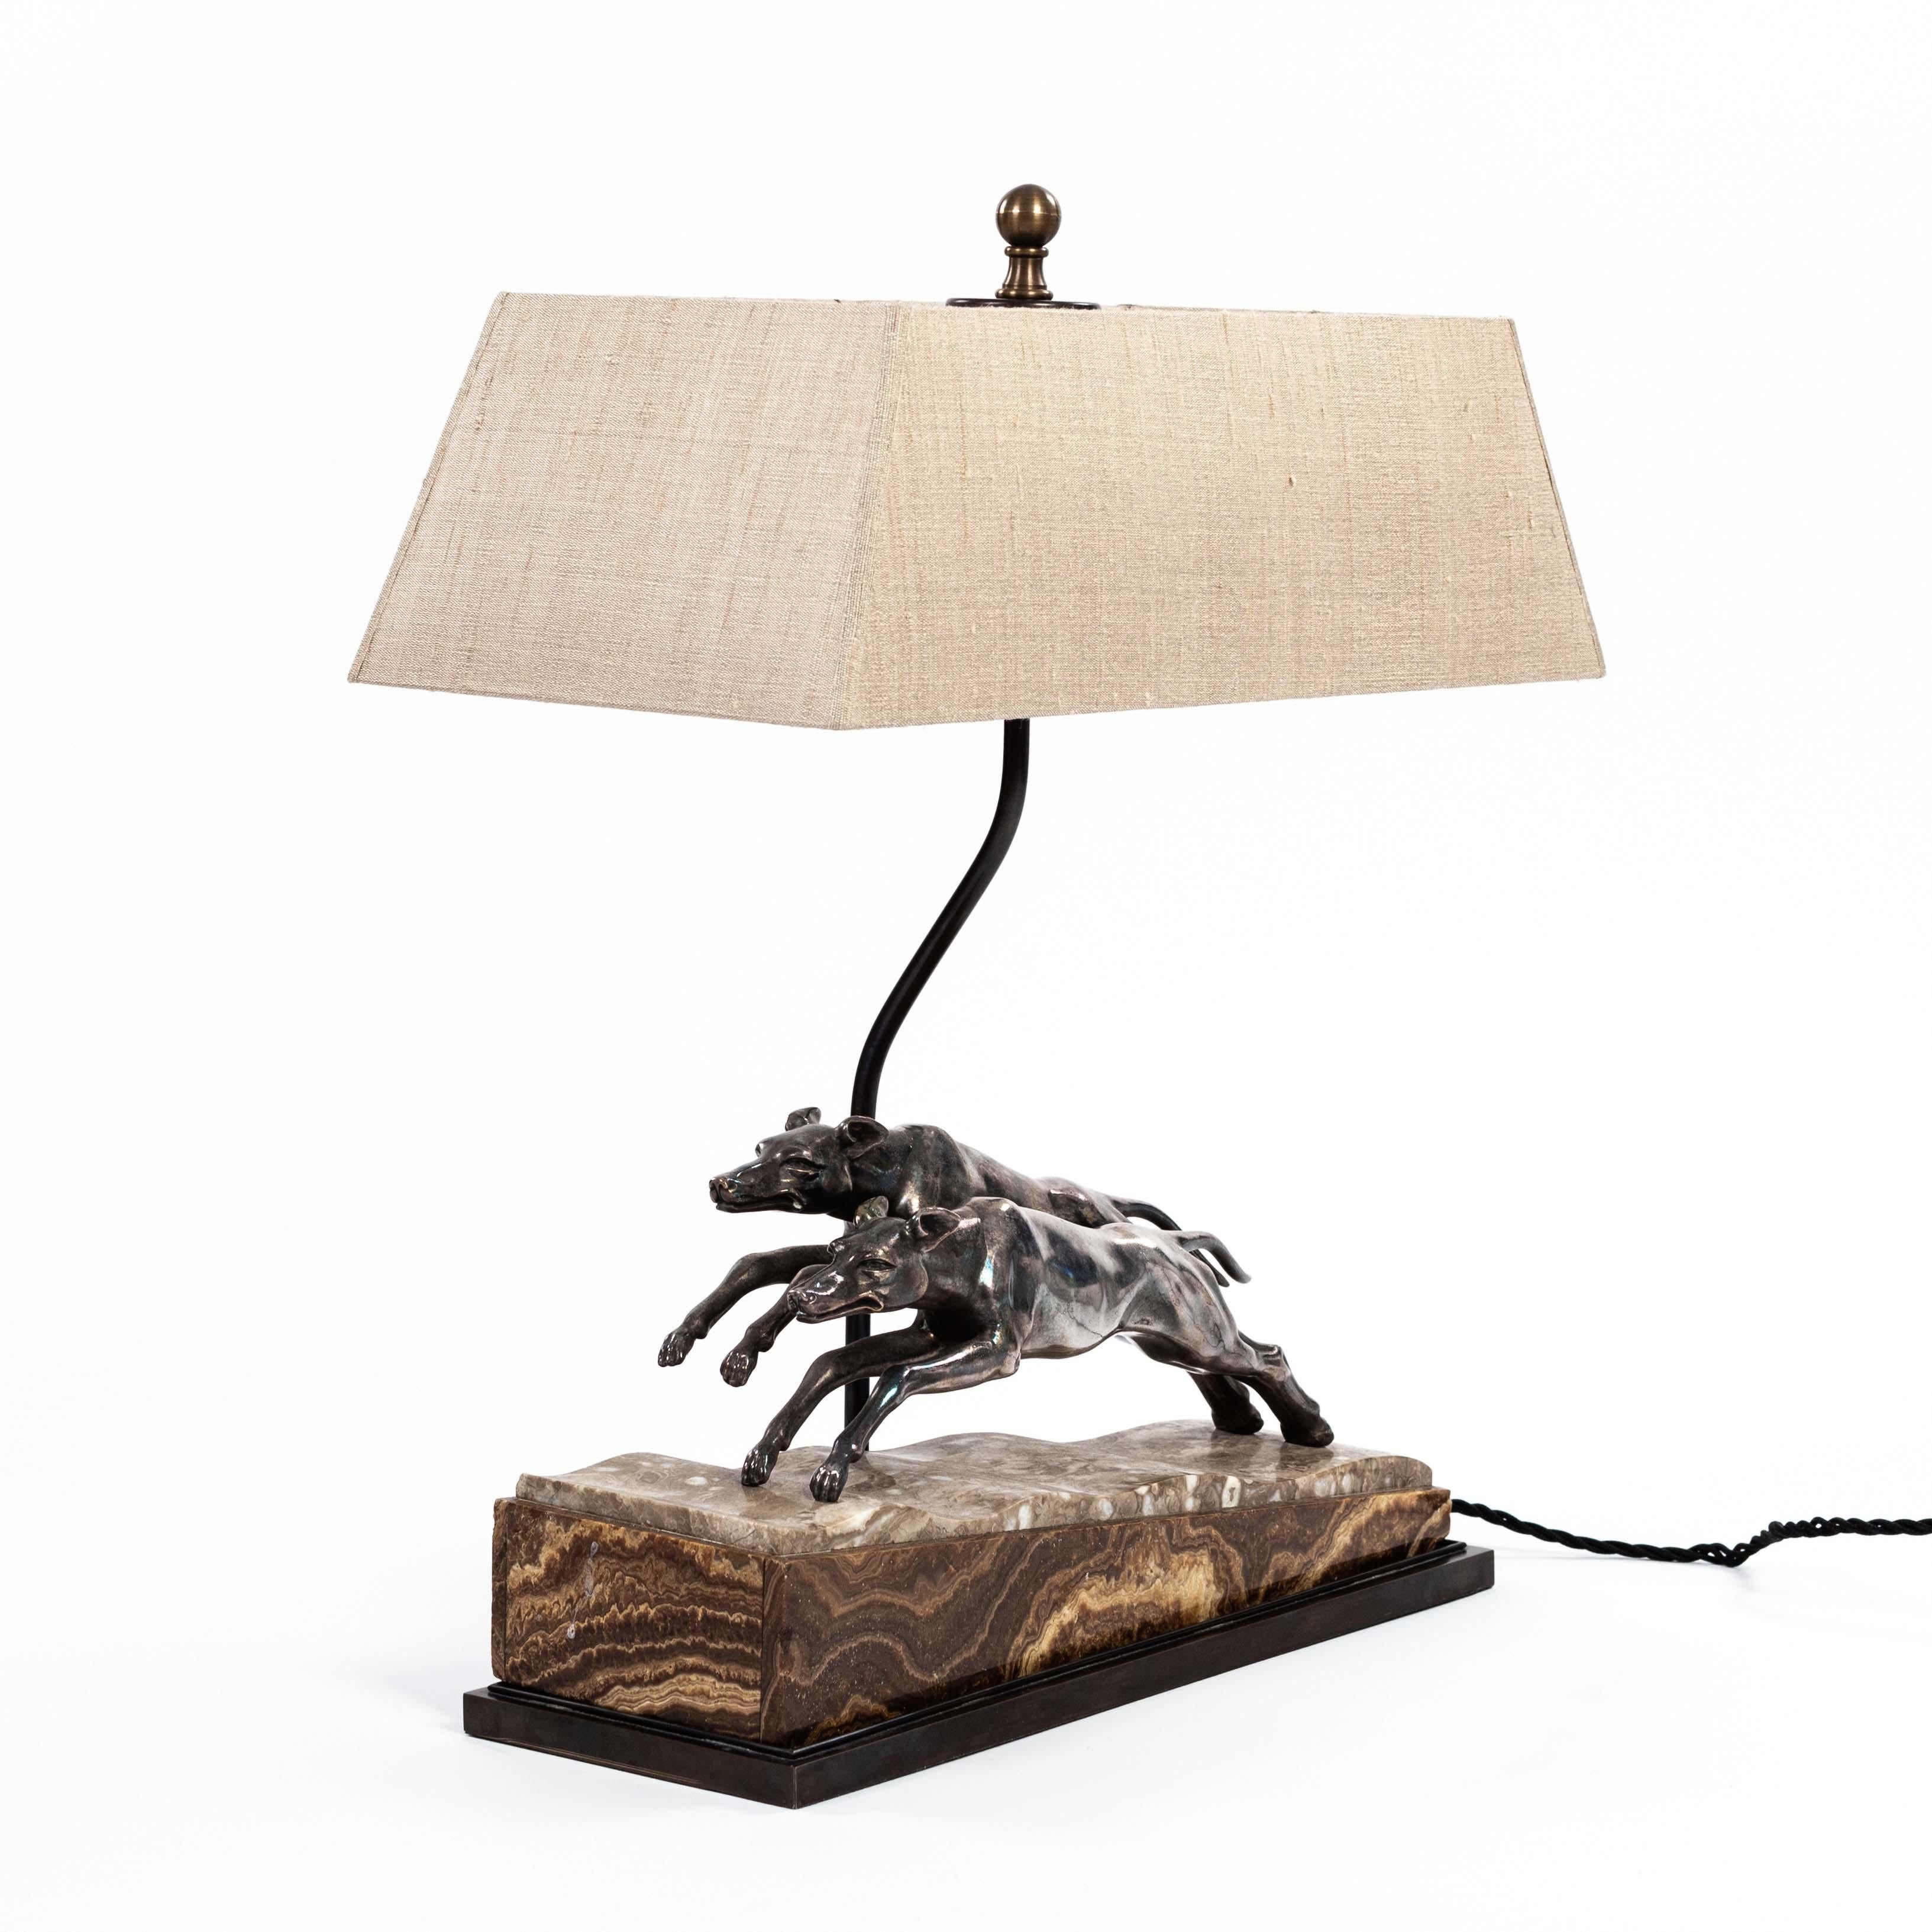 French Art Déco greyhound table lamp in silvered bronze on brown marble base 1930s

Greyhounds from the French Art Deco period as an expression of the luxurious lifestyle of that time.
The animals are in motion the marble base consisting of a